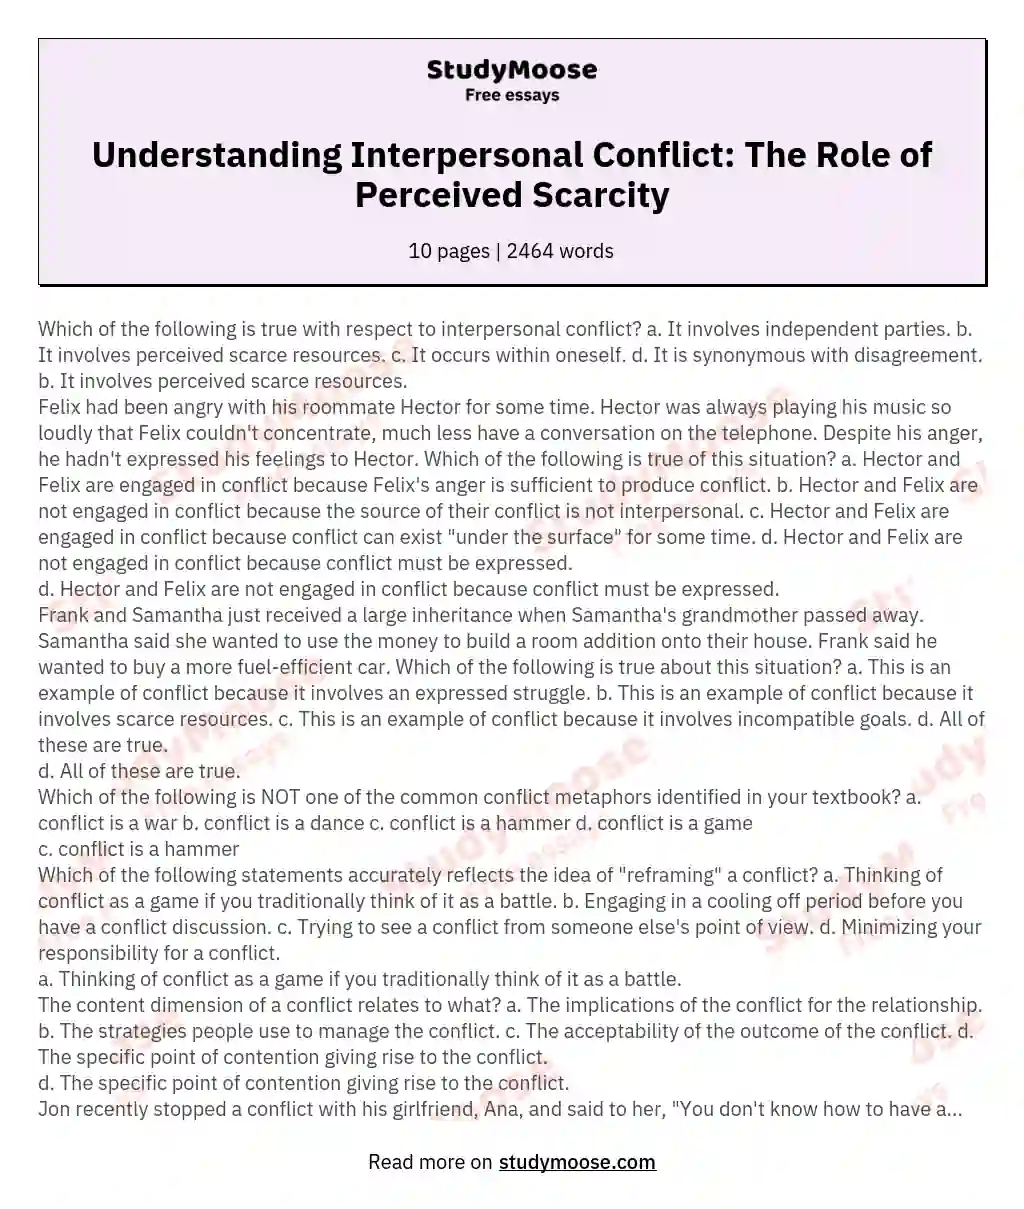 Understanding Interpersonal Conflict: The Role of Perceived Scarcity essay